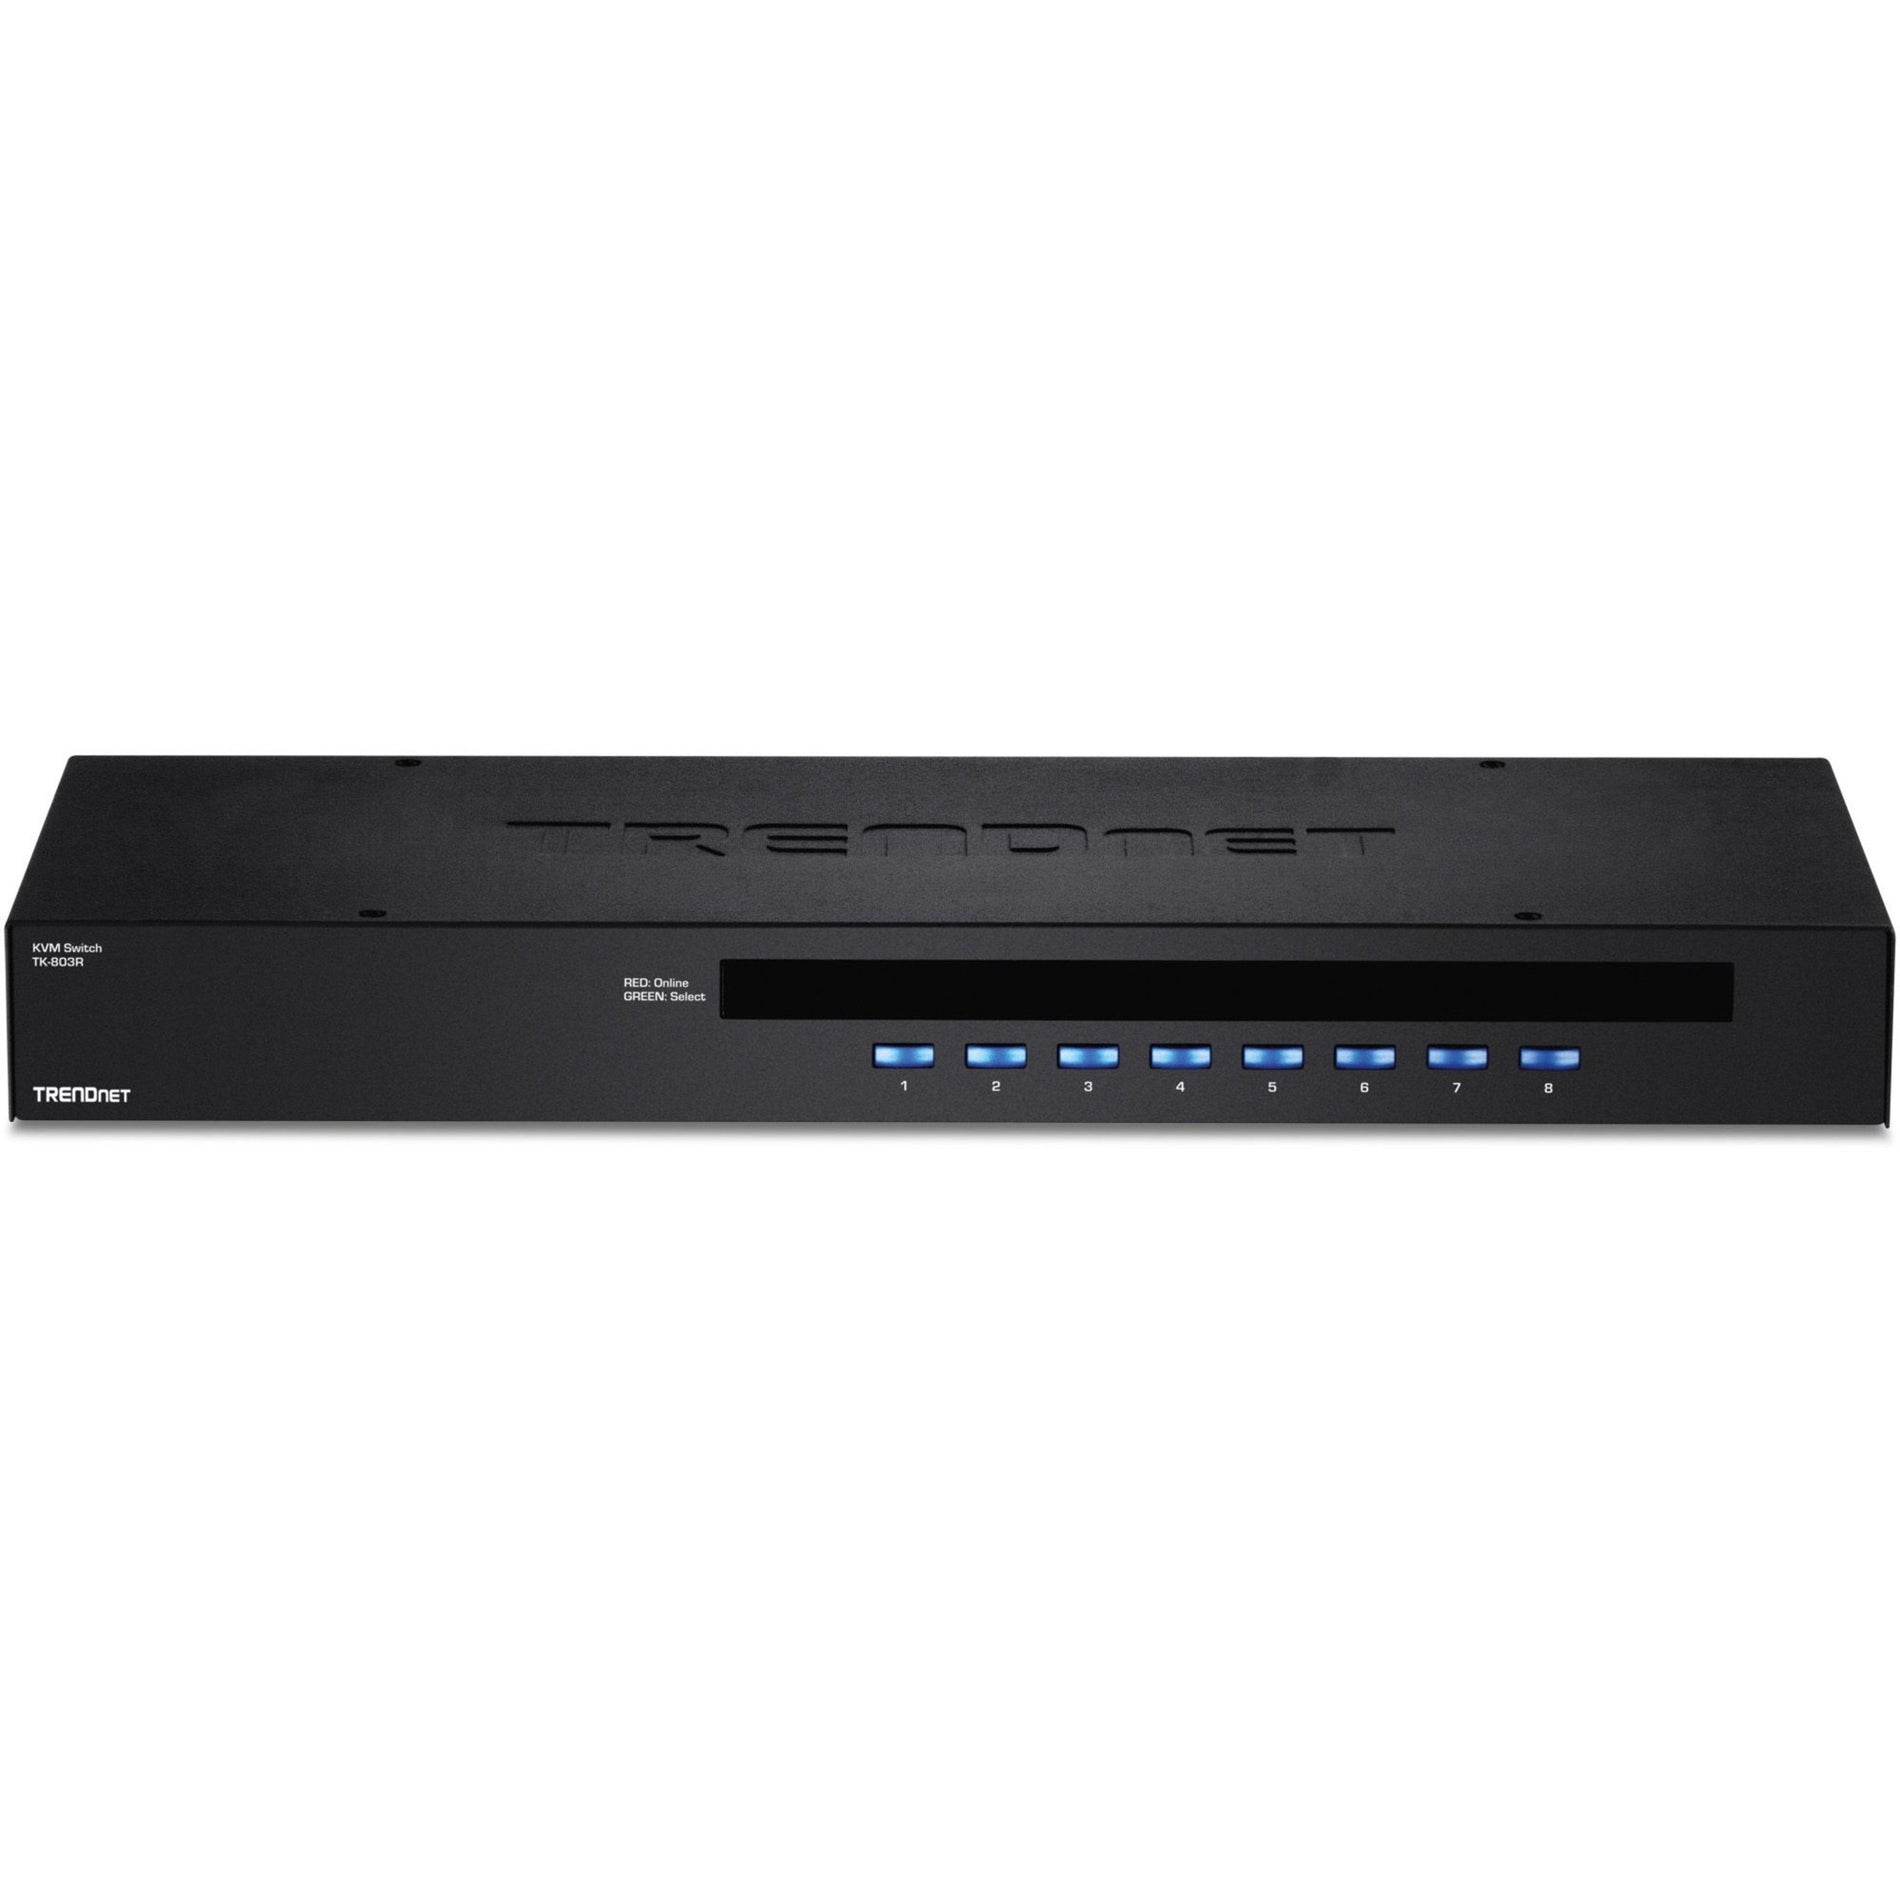 TRENDnet TK-803R 8-Port Rackmount KVM Switch, VGA & USB Connection, Device Monitoring, Auto Scan, Control up to 8 Computers/Servers